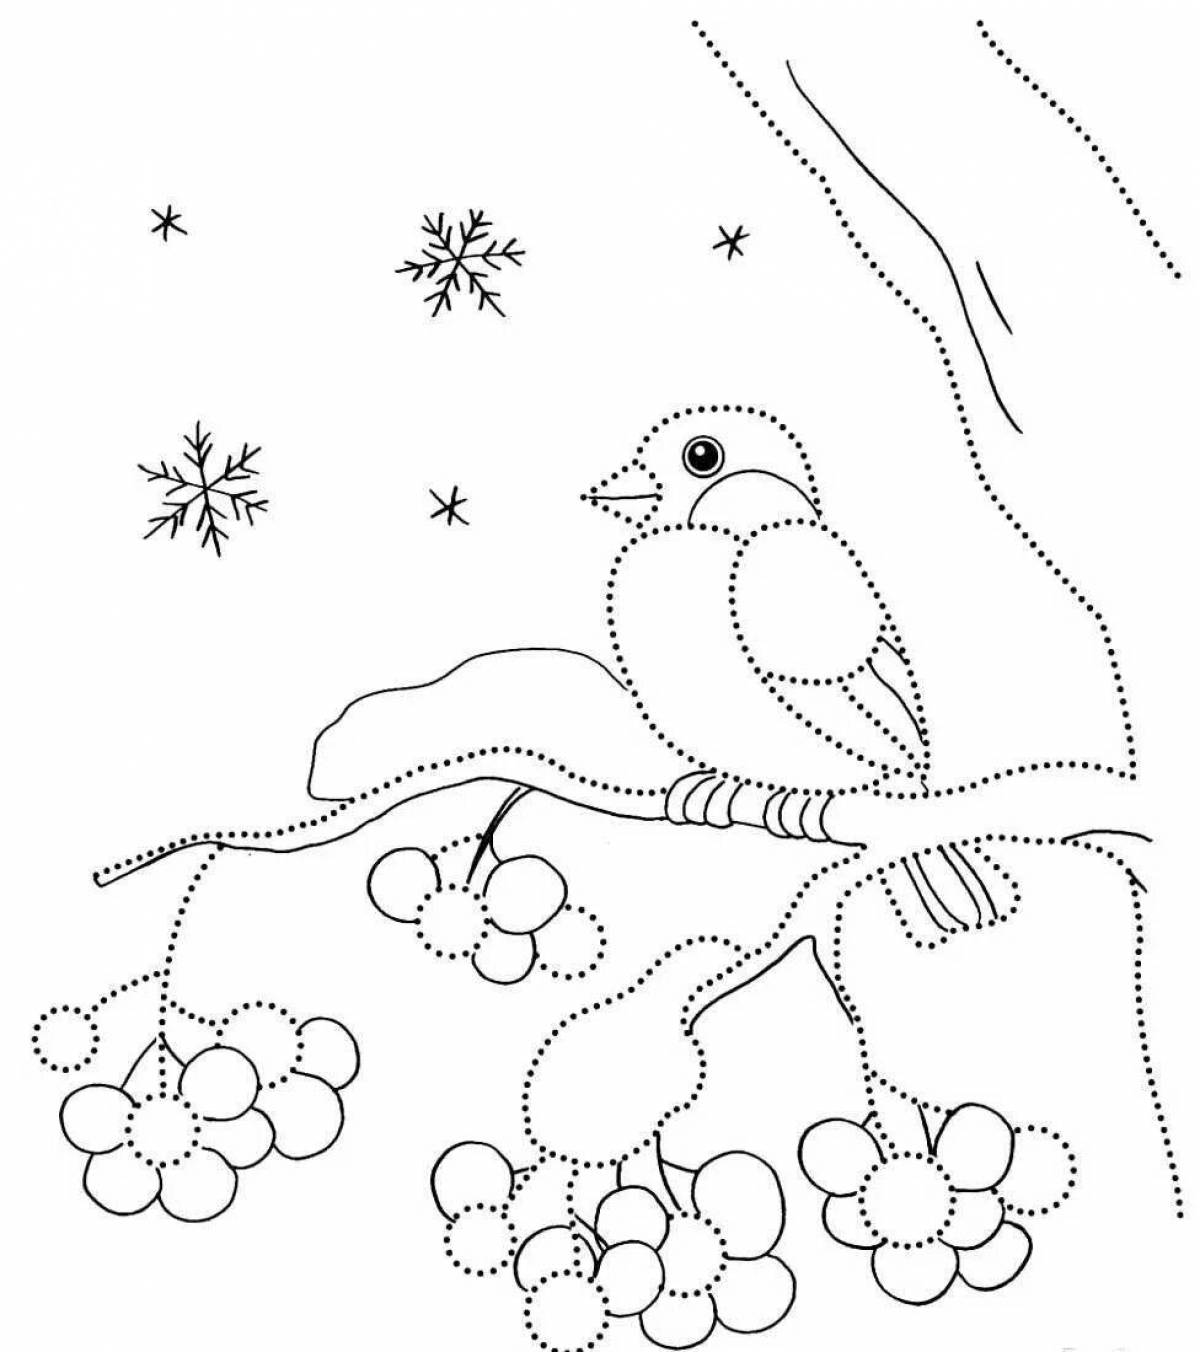 Refreshing winter nature coloring page